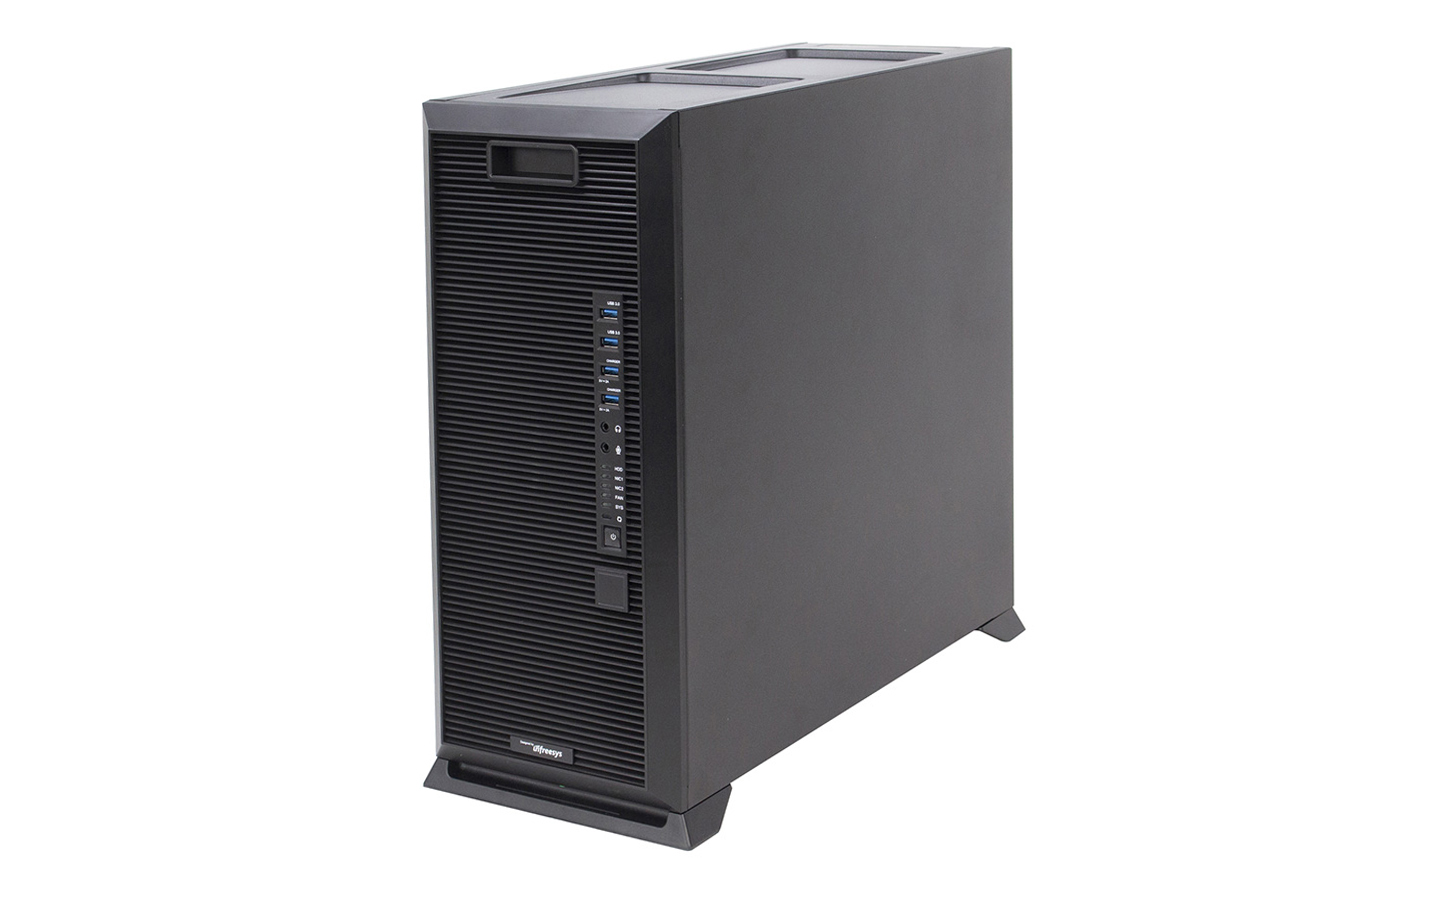 Single tower server chassis